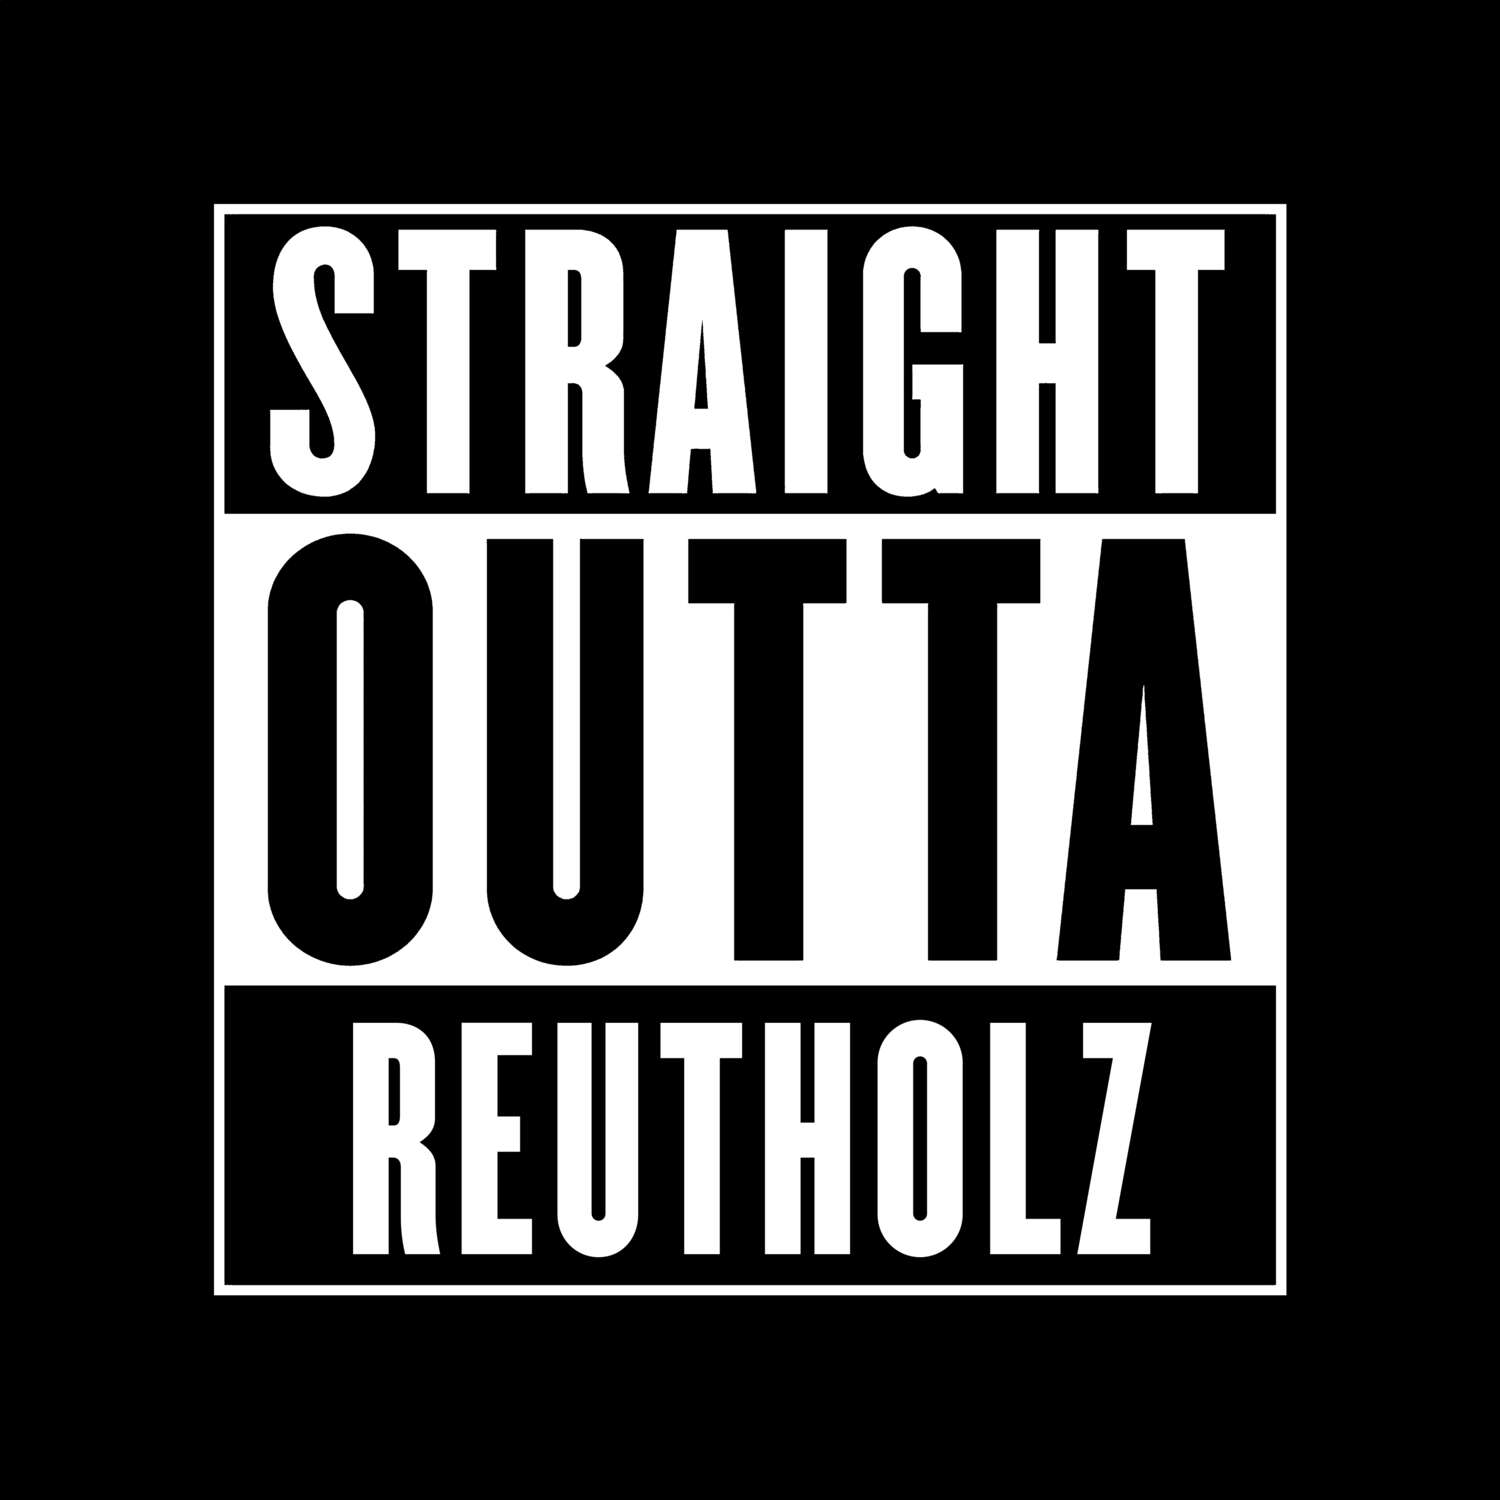 Reutholz T-Shirt »Straight Outta«